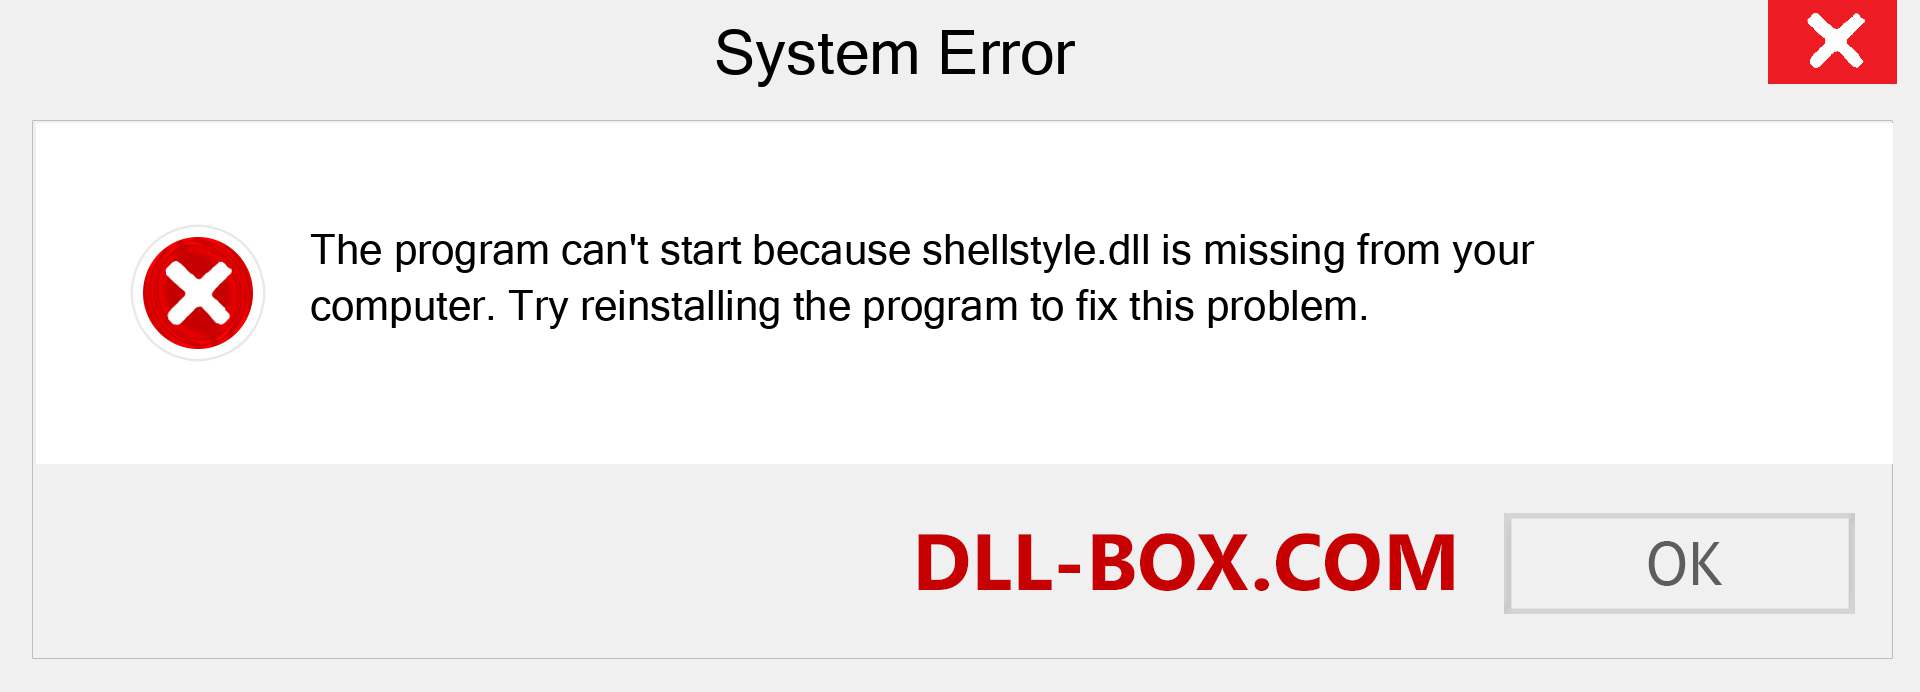  shellstyle.dll file is missing?. Download for Windows 7, 8, 10 - Fix  shellstyle dll Missing Error on Windows, photos, images